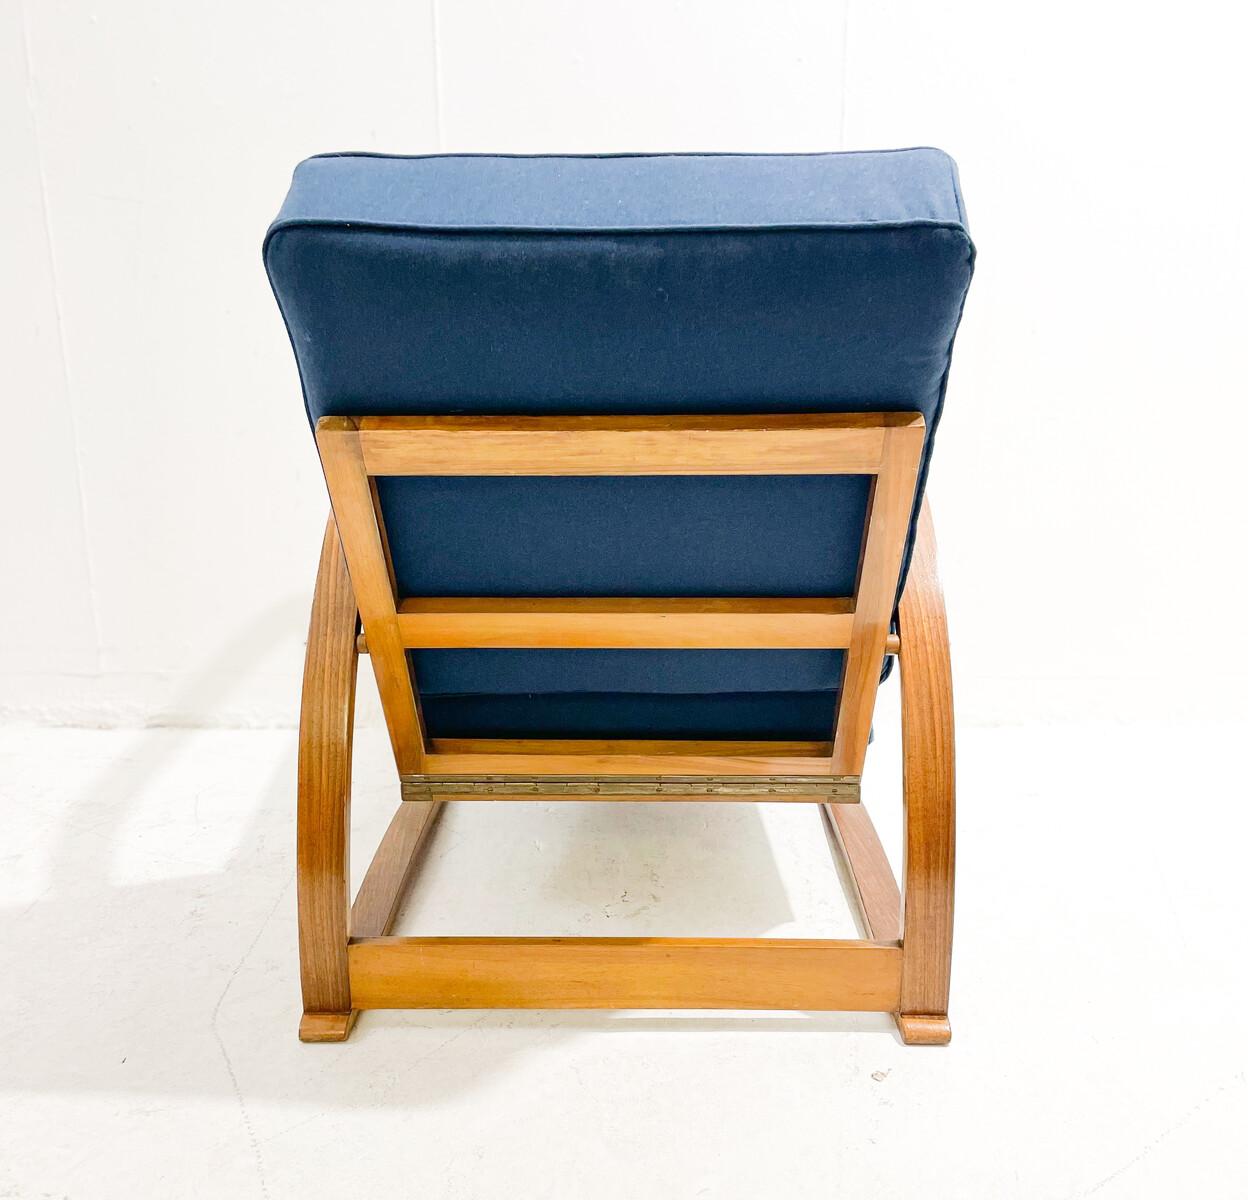 Bentwood Armchair, Jindrich Halabala with Adjustable Back, Czech Republic, 1940s For Sale 1